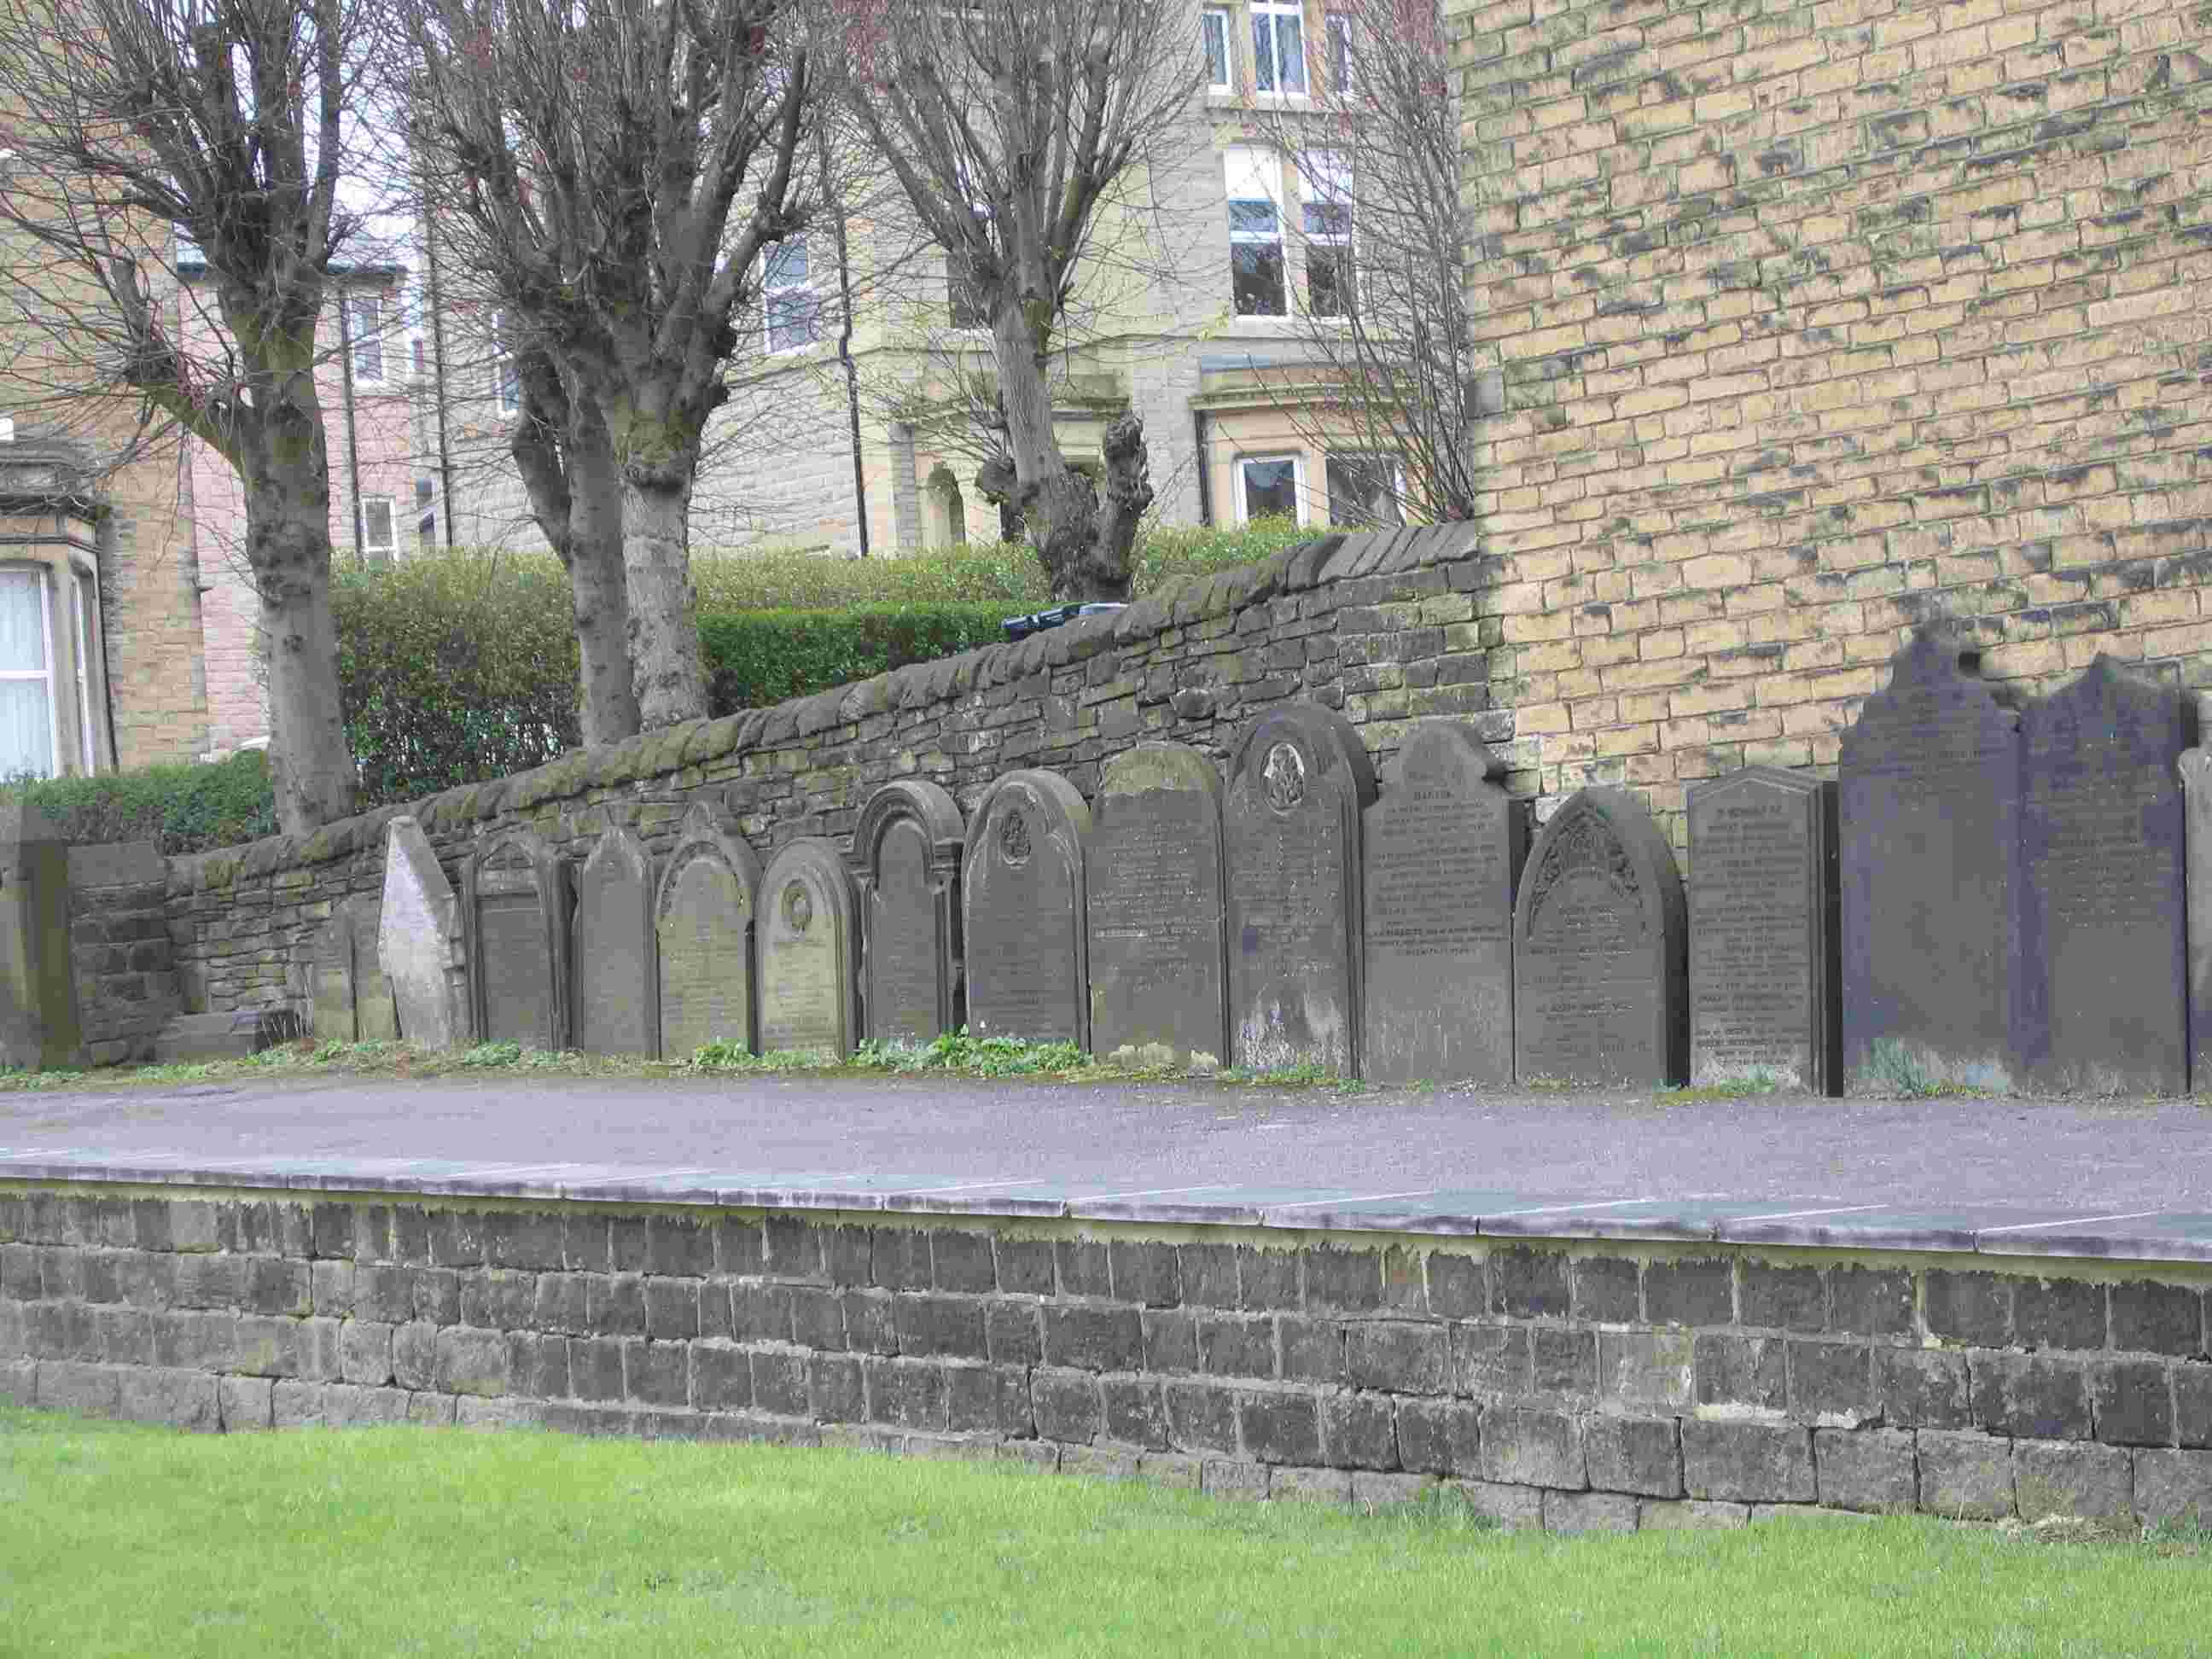 Tombstones placed against wall in front of main entrance to St Paul's Church, Shipley, Diocese of Bradford